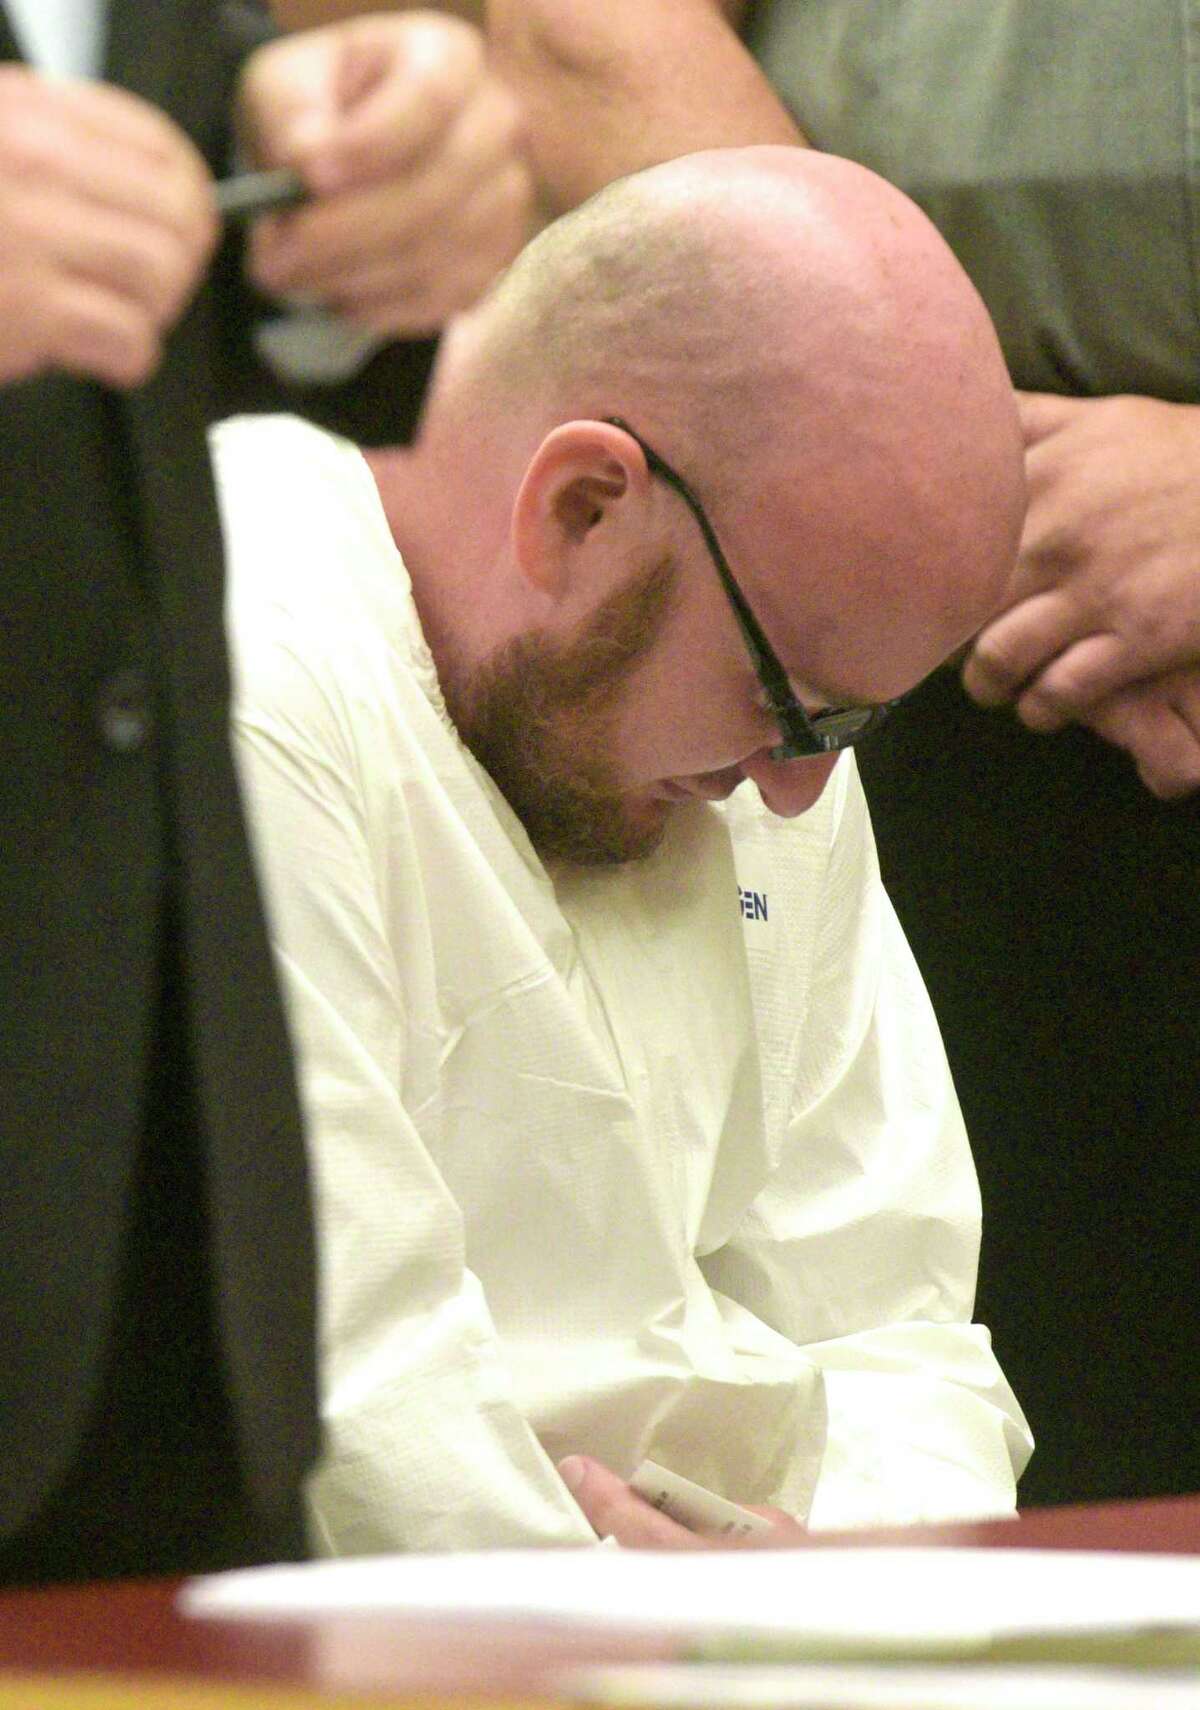 David MacDowell, 34, of Bethel, was arraigned on manslaughter in the first degree charges at Danbury Superior Court on Monday, August 26, 2019, in Danbury, Conn.